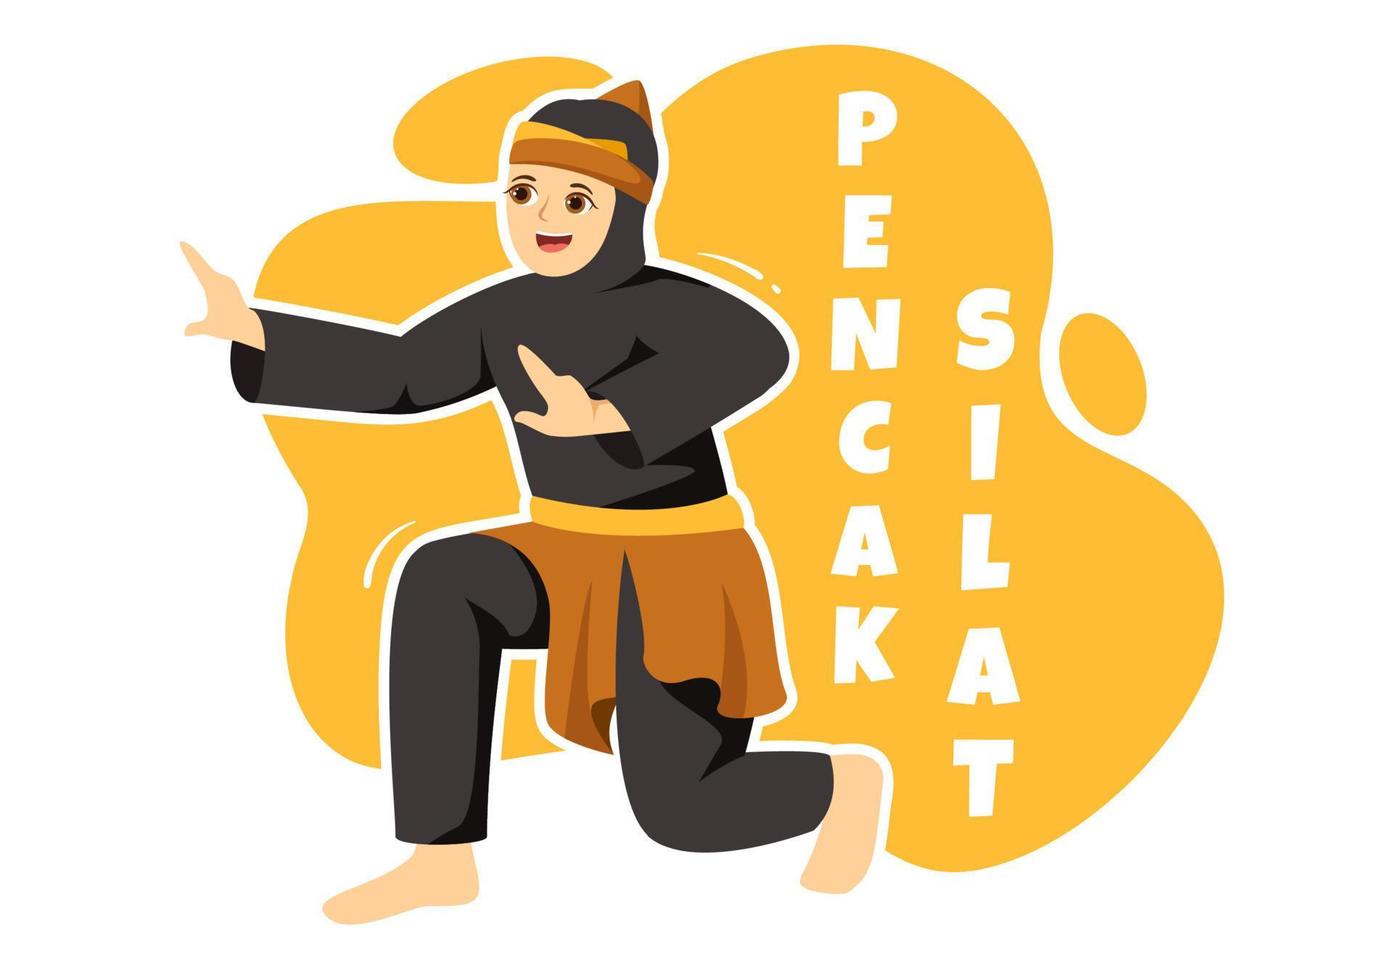 Pencak Silat Sport Illustration with People Pose Martial Artist from Indonesia for Web Banner or Landing Page in Flat Cartoon Hand Drawn Templates vector